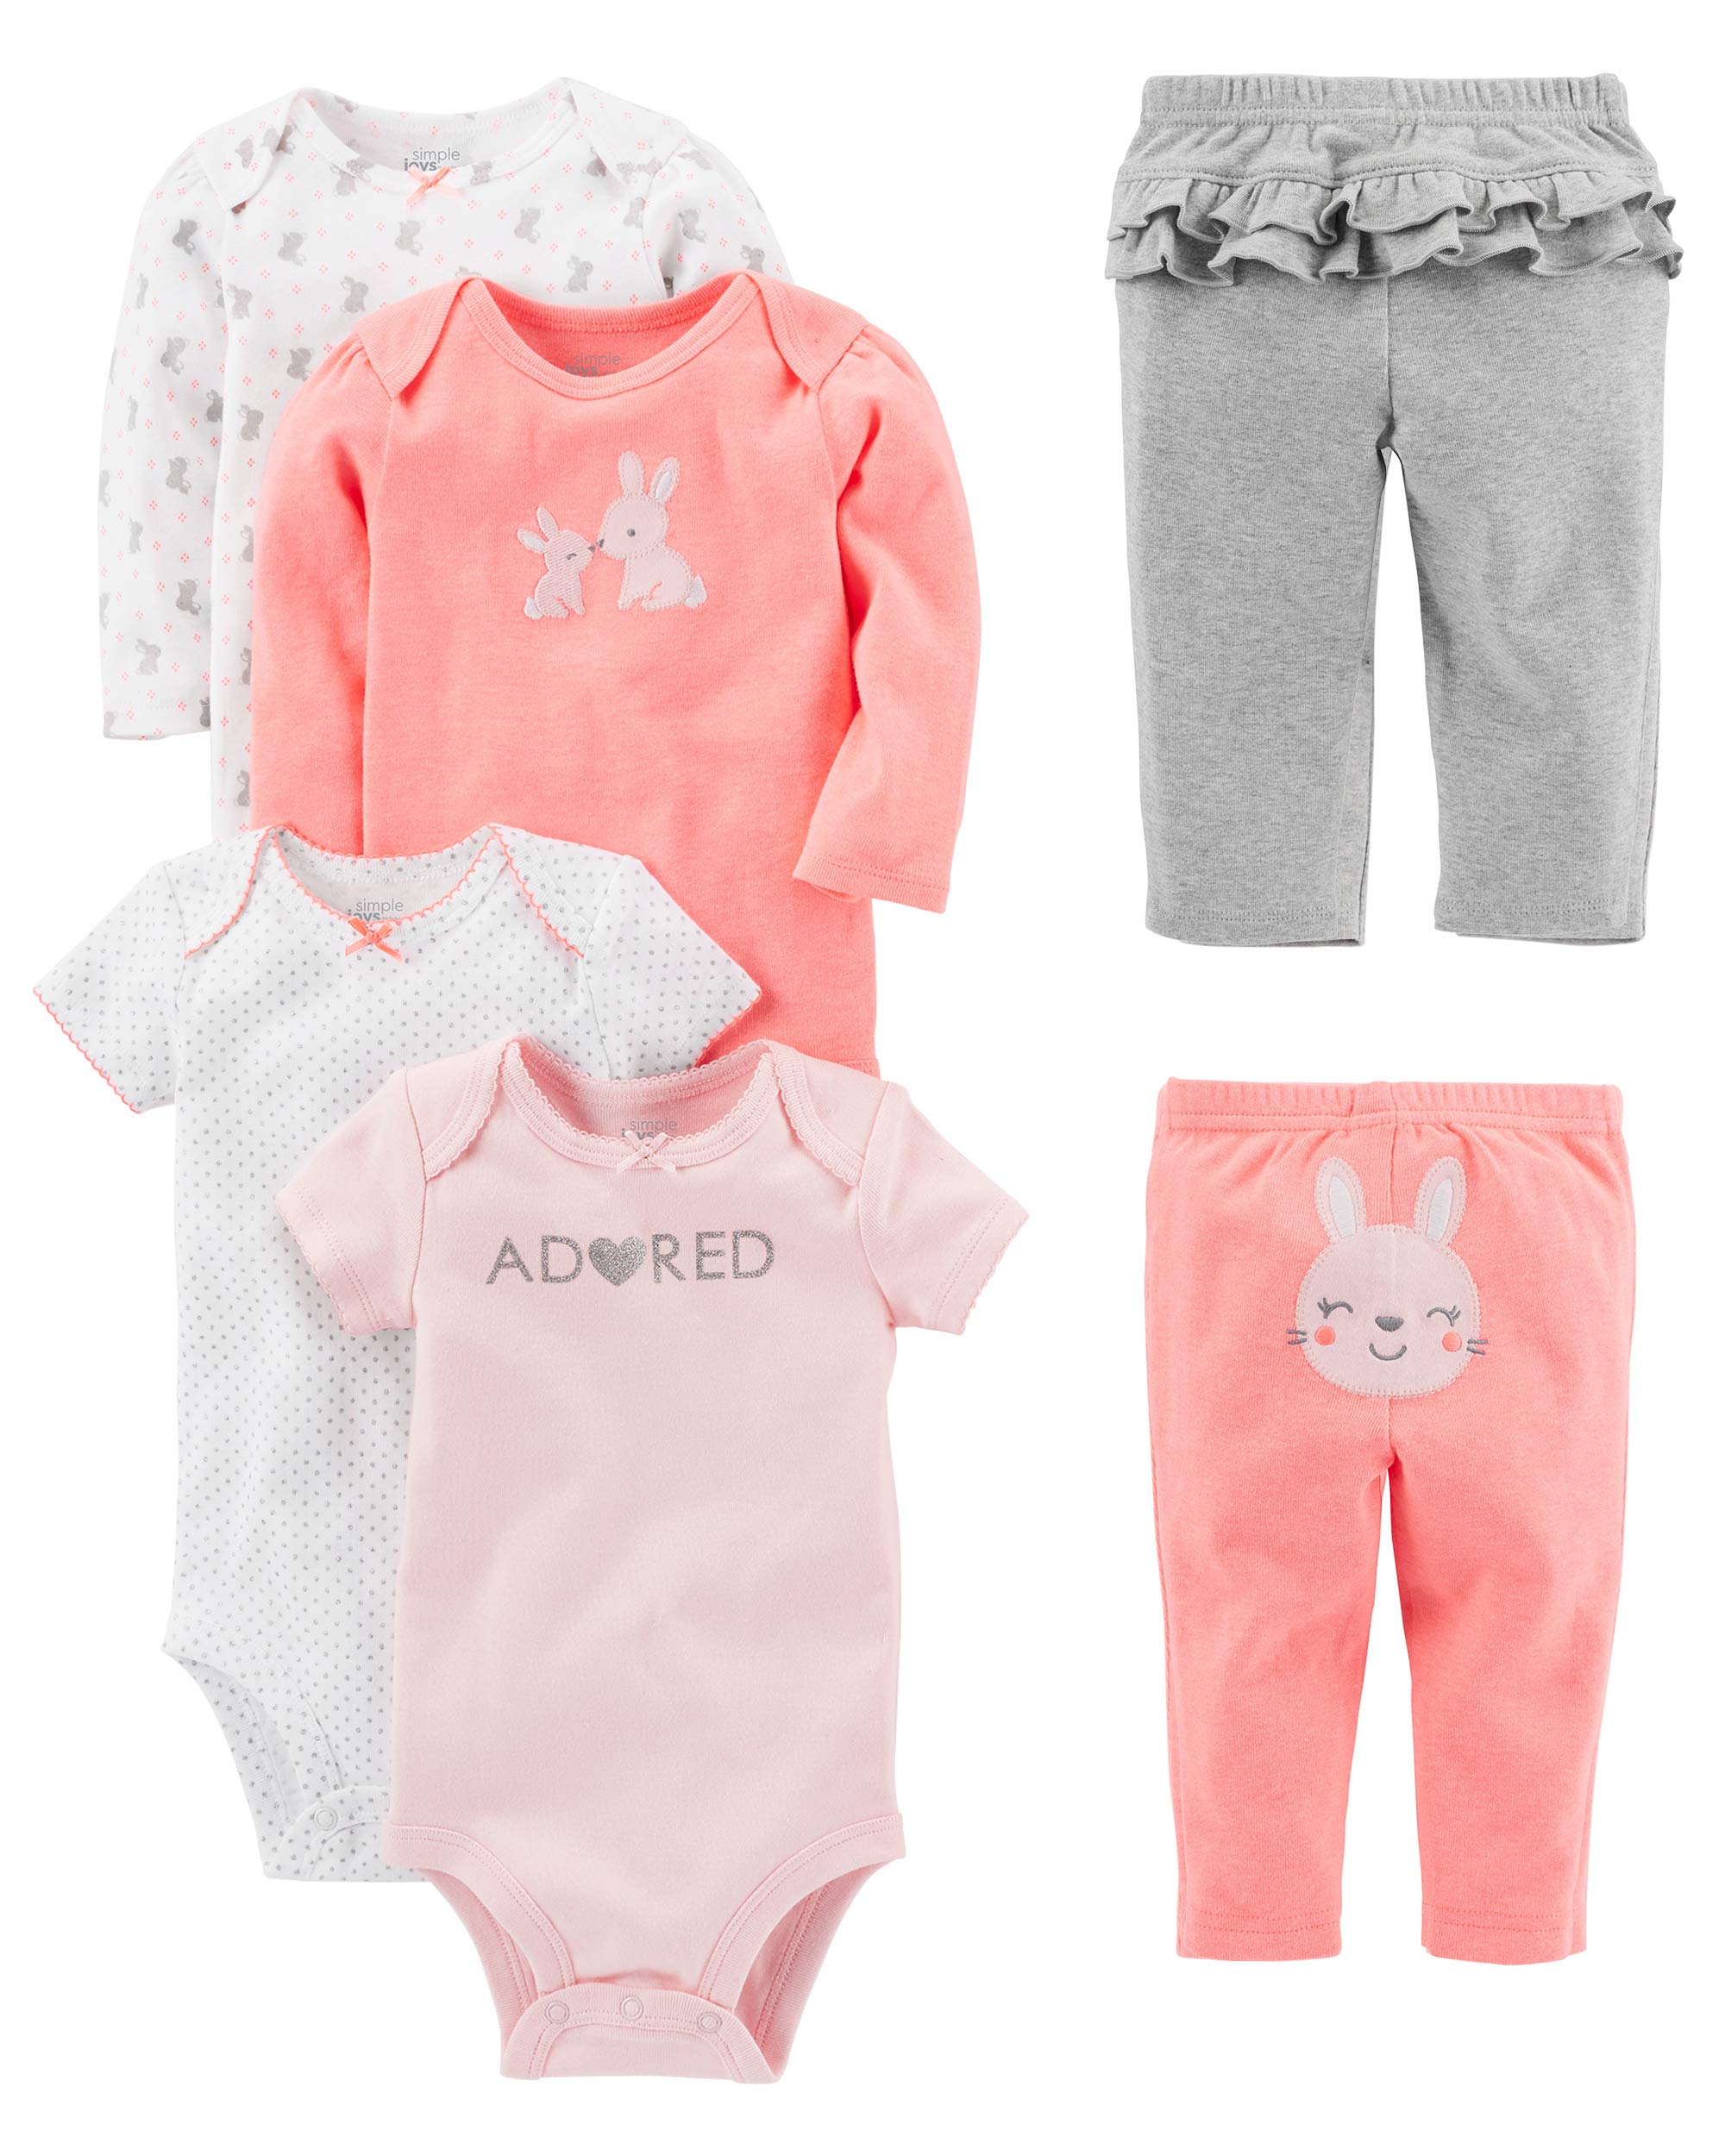 Simple Joys by Carter's Baby Girls' 6-Piece Bodysuits (Short and Long Sleeve) and Pants Set